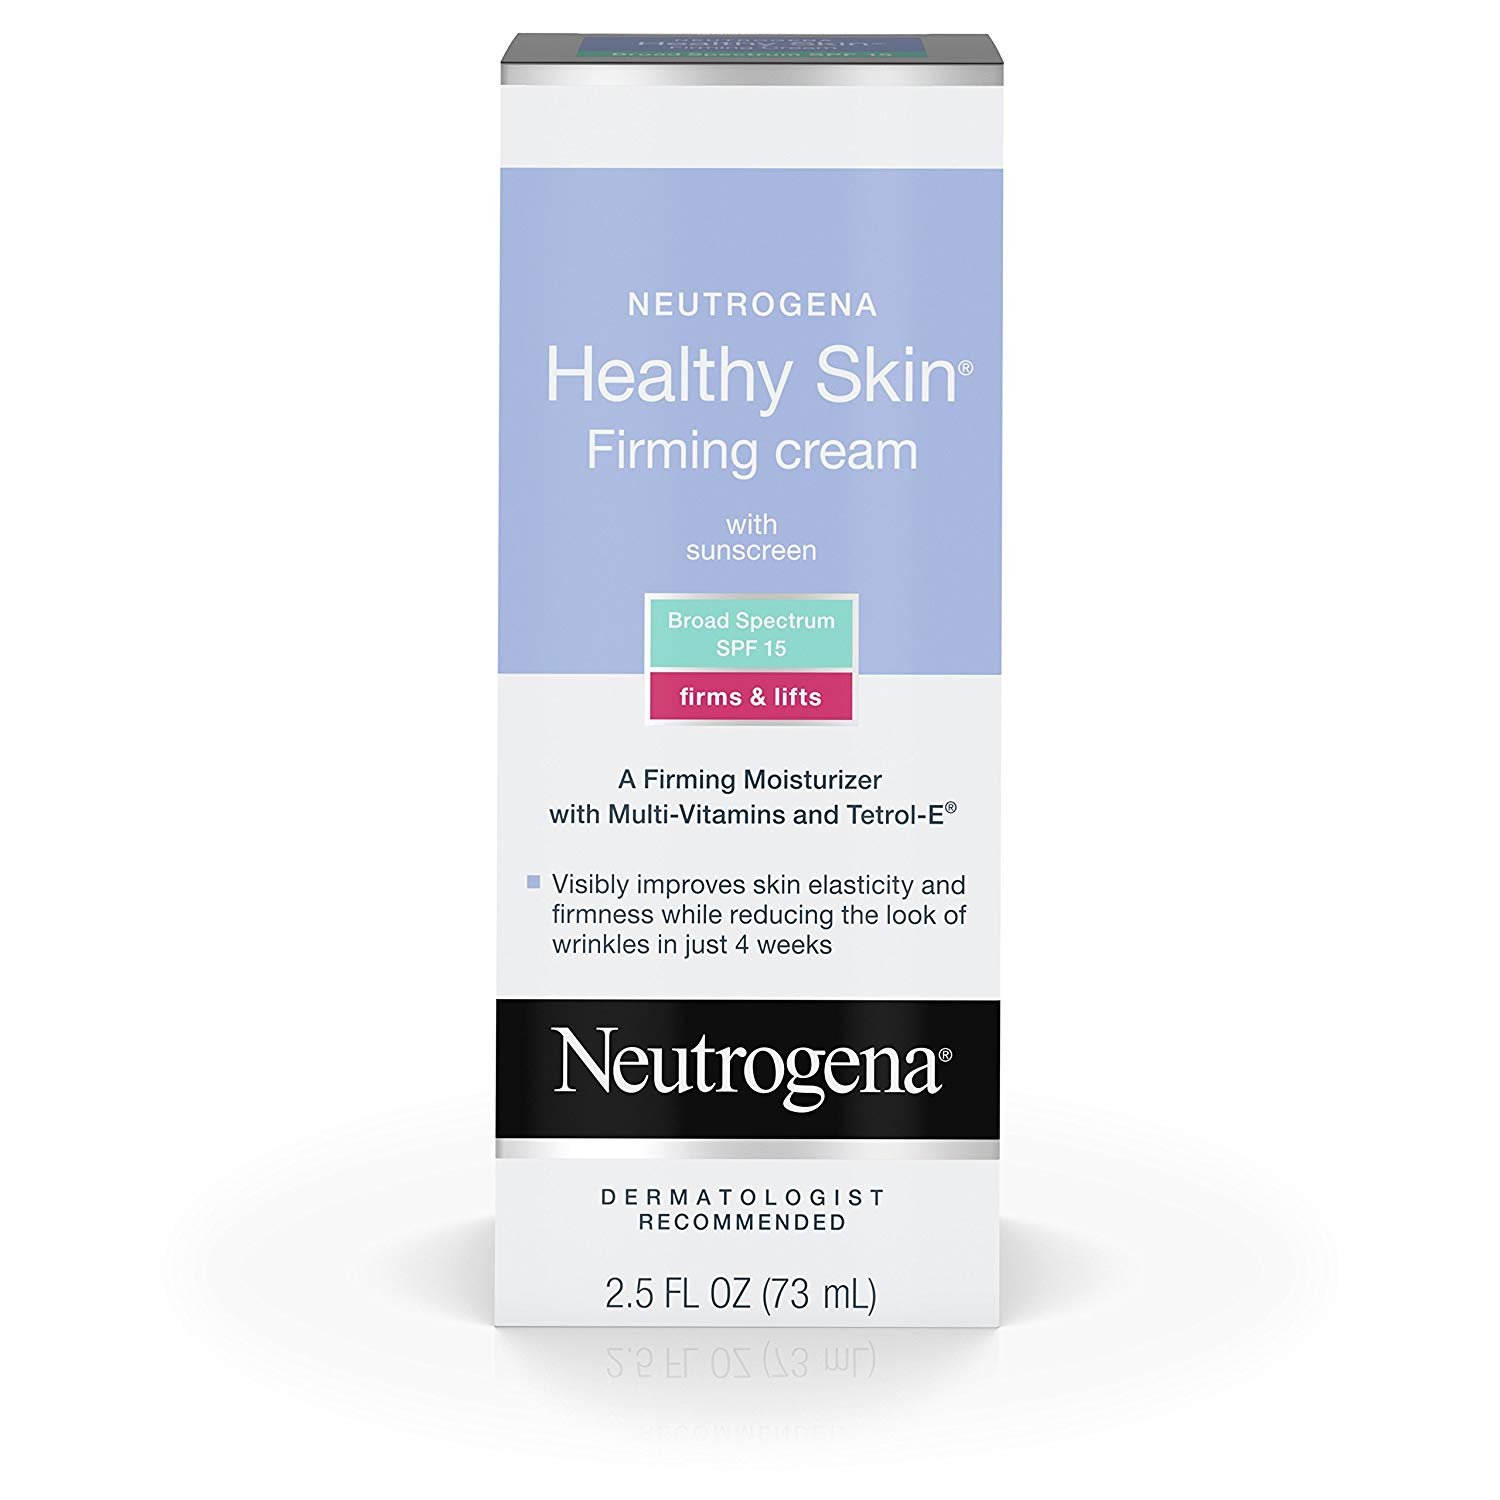 Neutrogena Healthy Skin Firming Cream with SPF 15 Sunscreen & Tetrol-E, Hypoallergenic & Non-Comedogenic Anti-Wrinkle Face Cream to Visibly Firm, Tighten & Lift Skin, 2.5 fl. oz - image 2 of 10